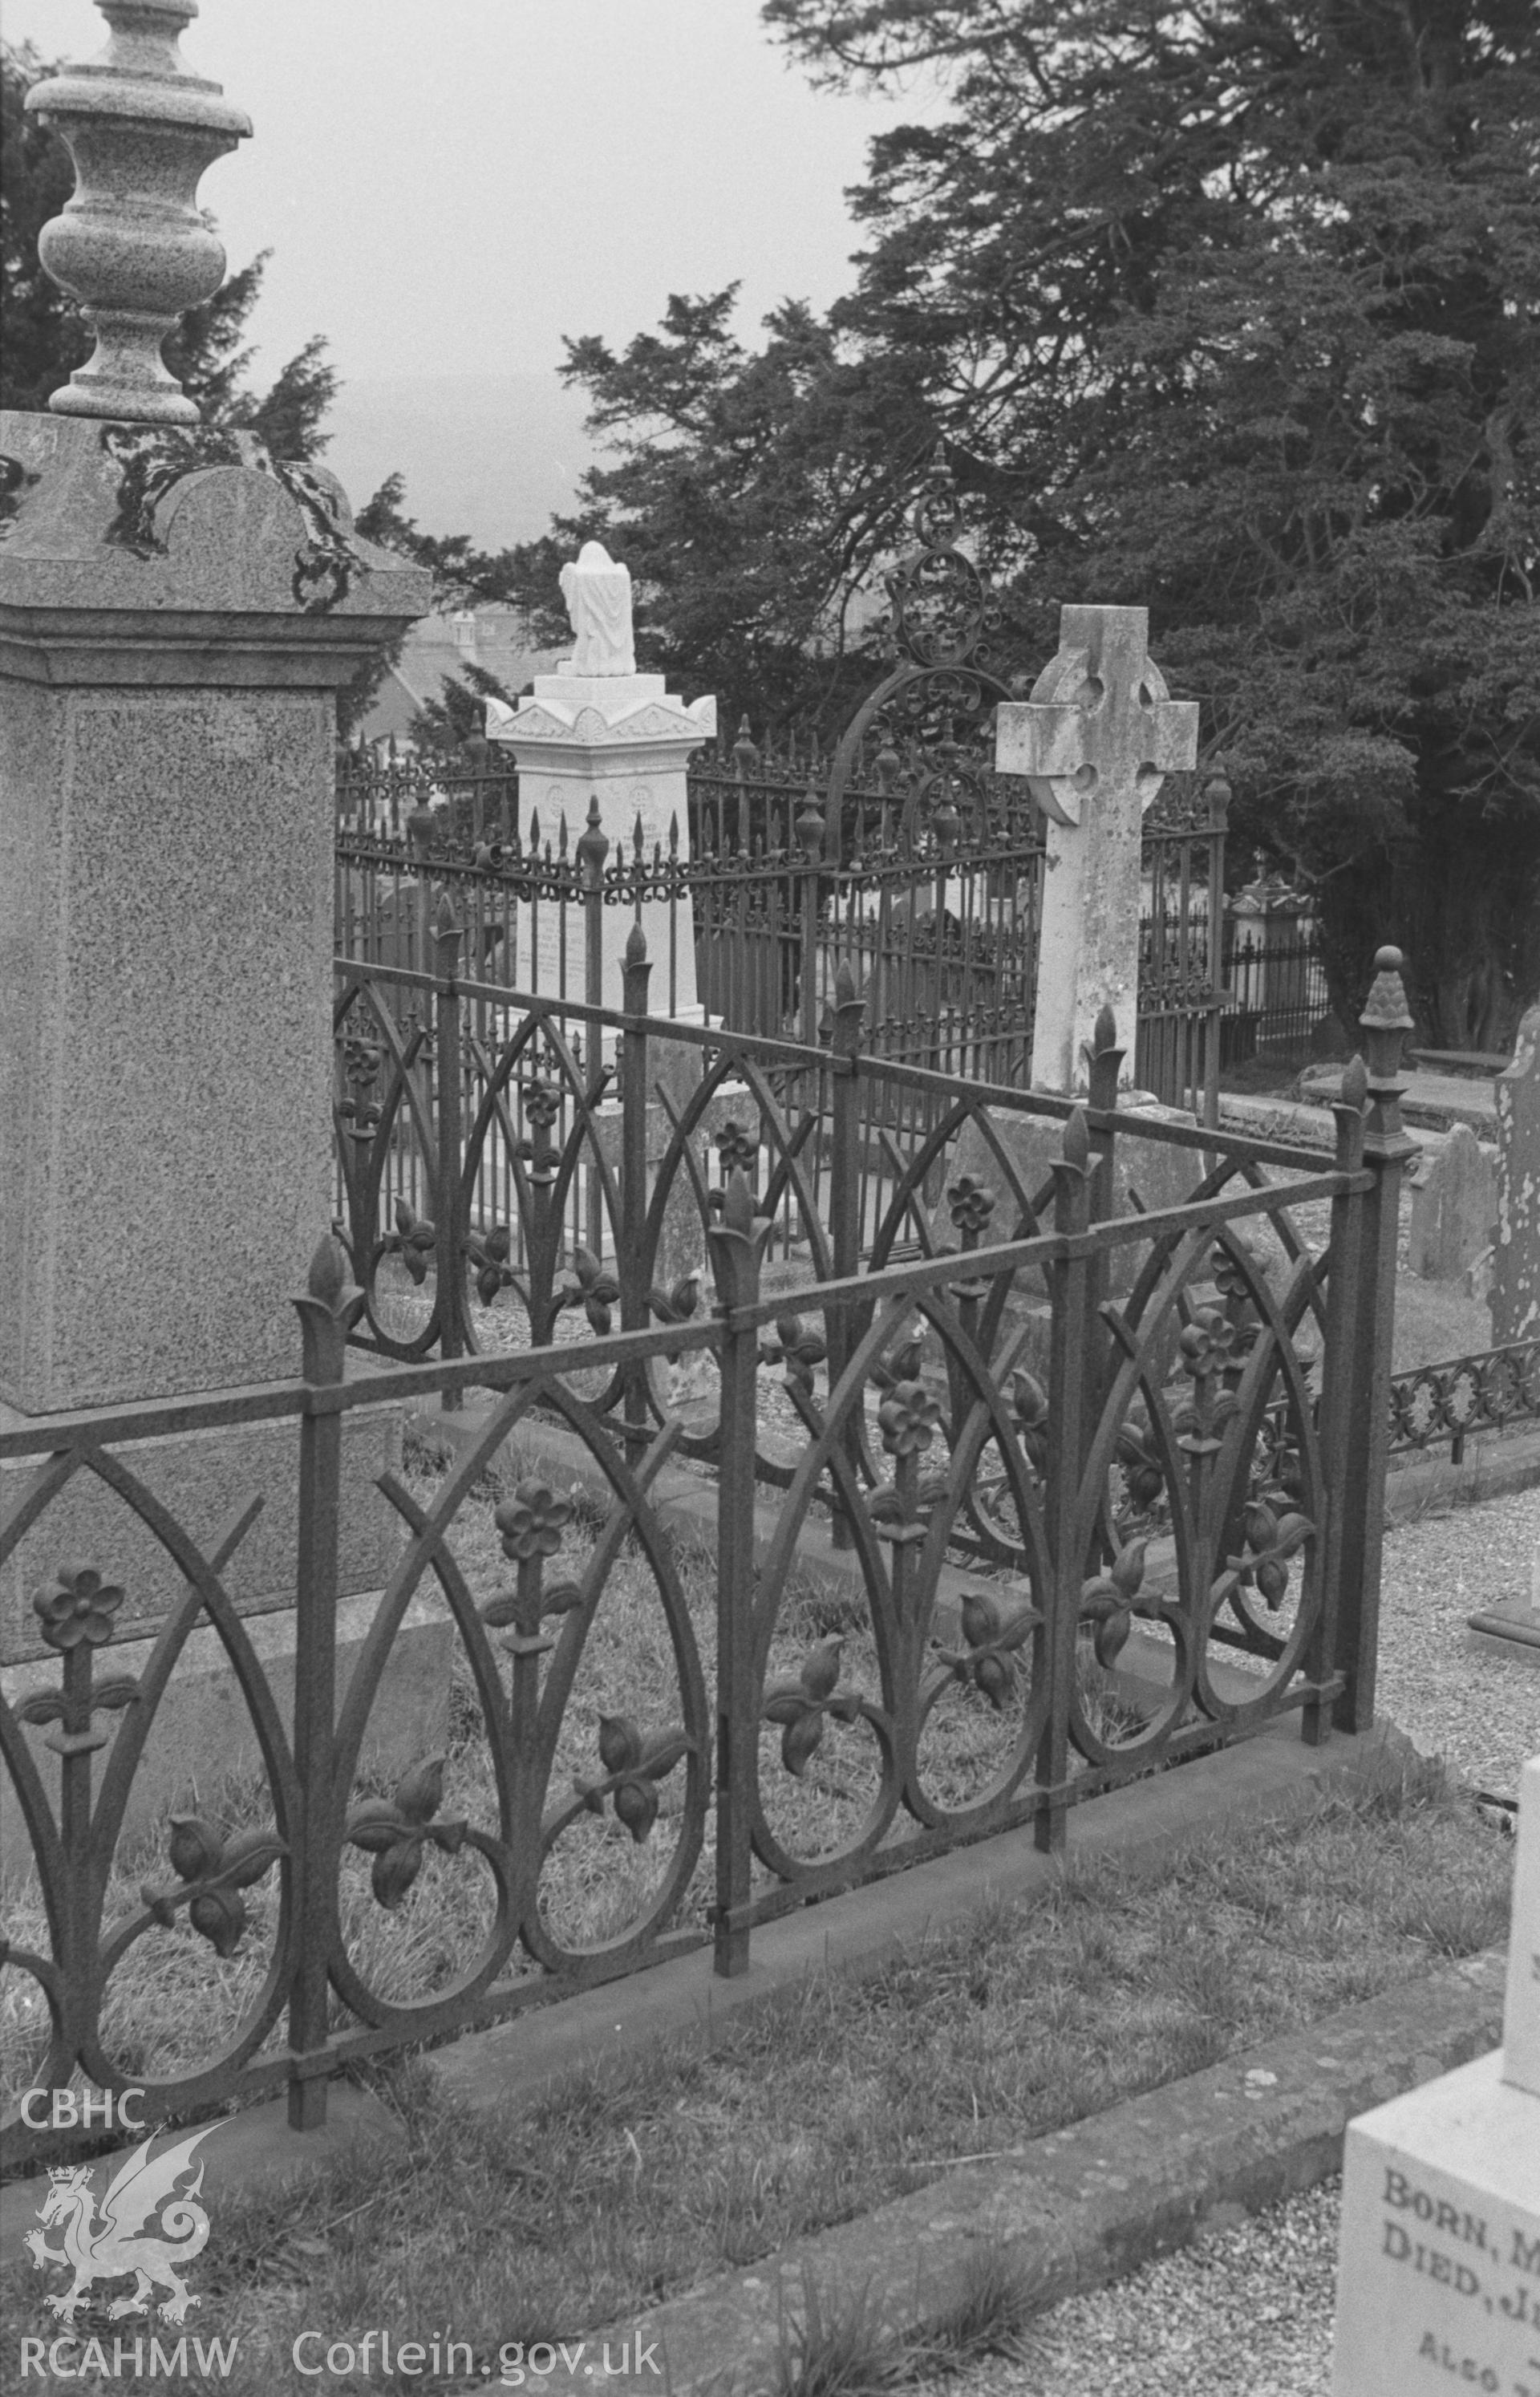 Digital copy of a black and white negative showing view of cast iron grave enclosure in the churchyard at St. Peters church, Lampeter. Photographed in March 1964 by Arthur O. Chater from Grid Reference SN 575 483, looking south east.